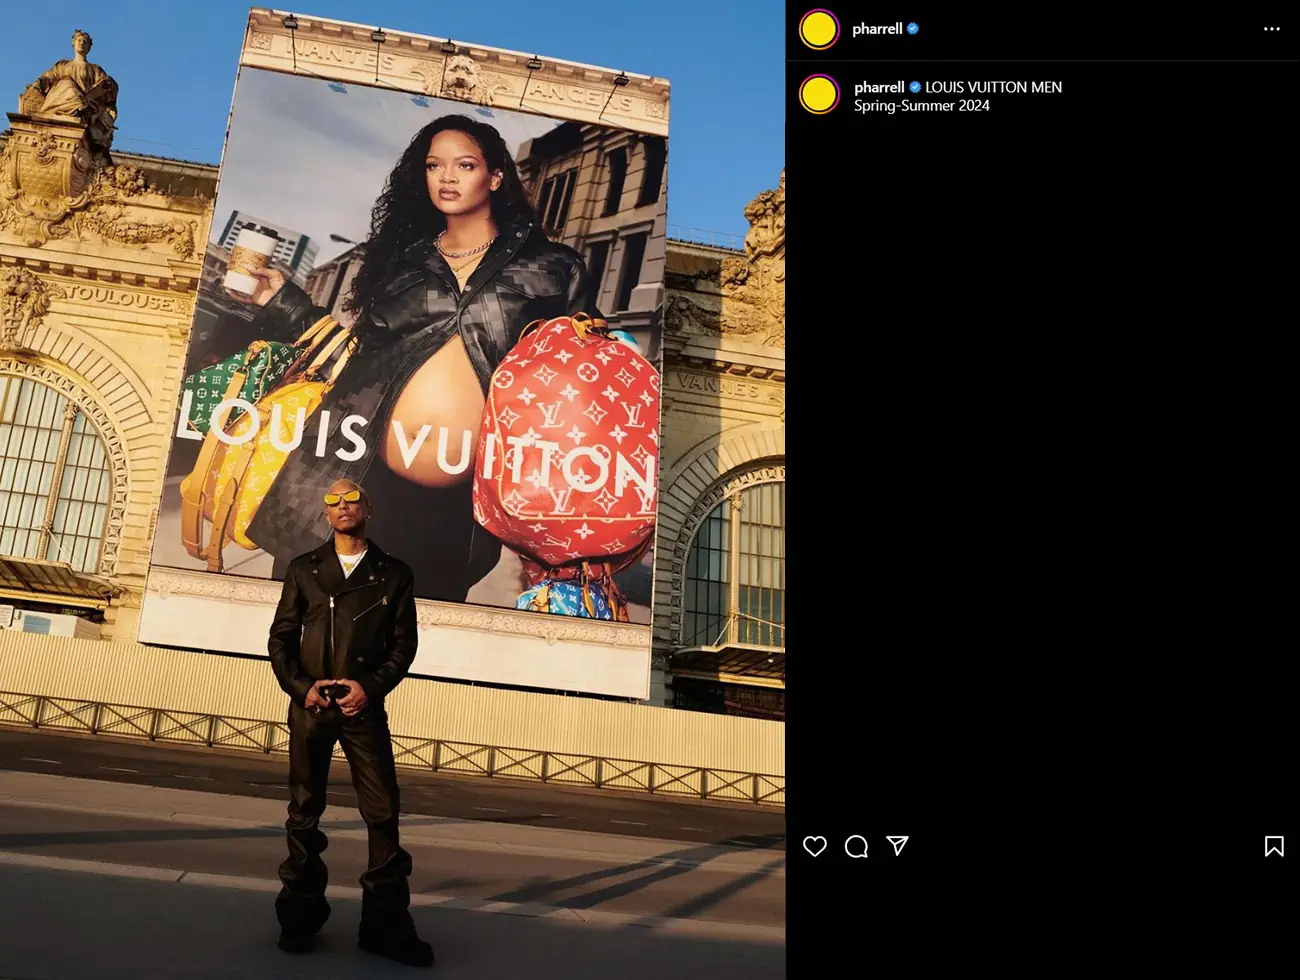 See More of Pregnant Rihanna in Louis Vuitton's New Campaign